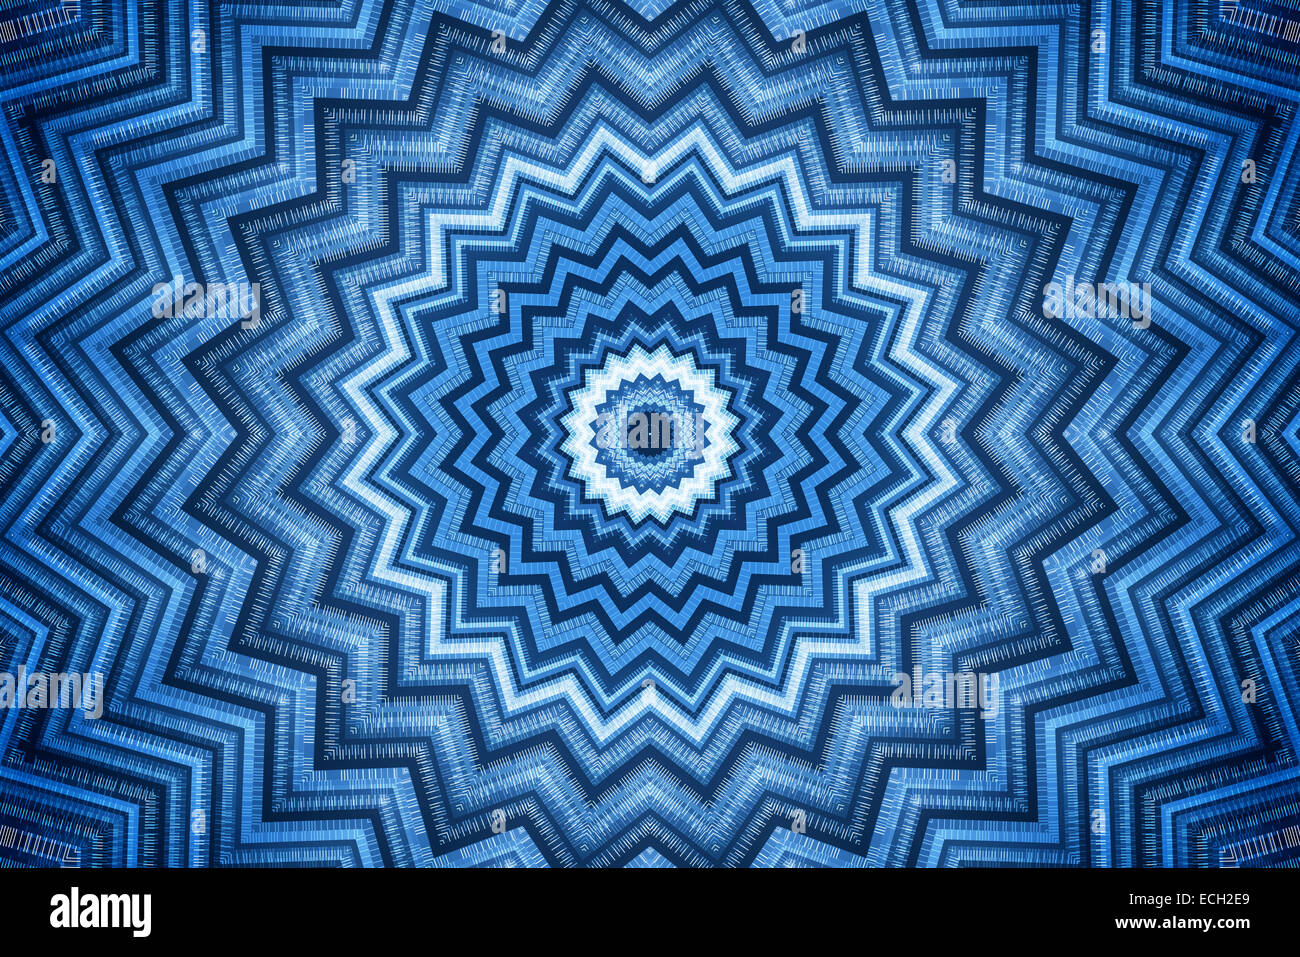 Blue kaleidoscope image as abstract pattern background Stock Photo